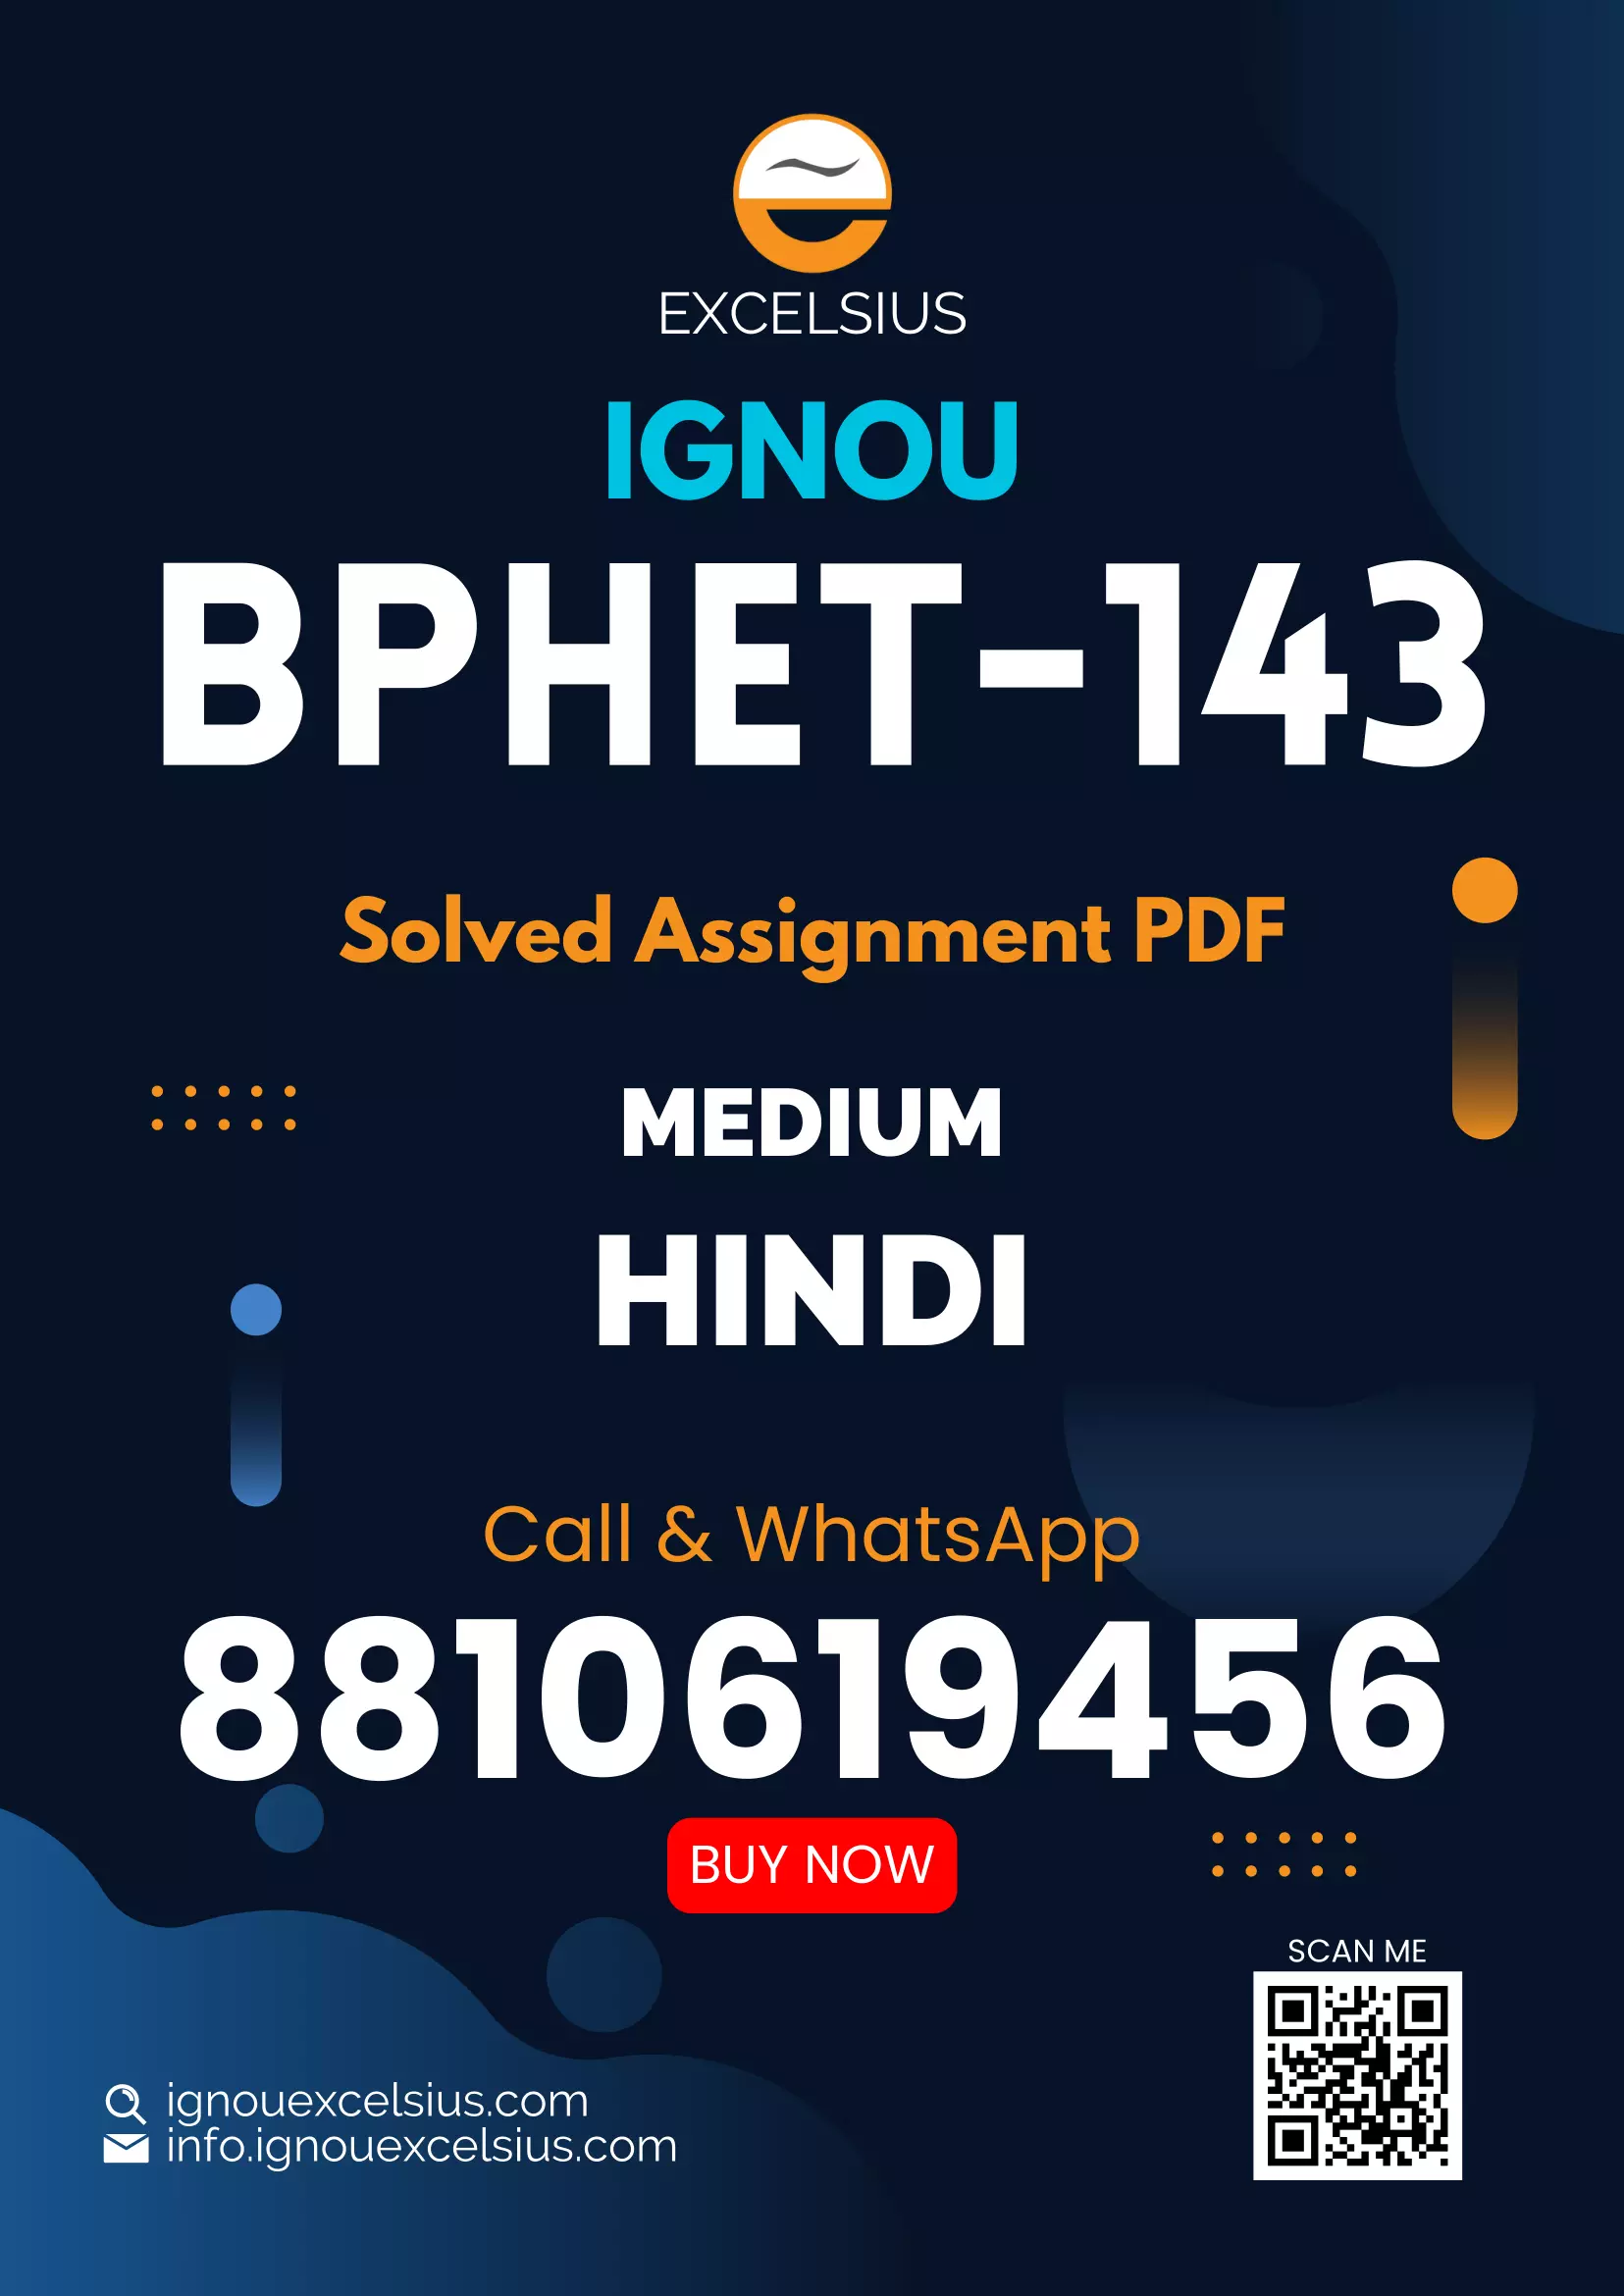 IGNOU BPHET-143 - Digital and Analog Circuits and Instrumentation Latest Solved Assignment-January 2023 - December 2023